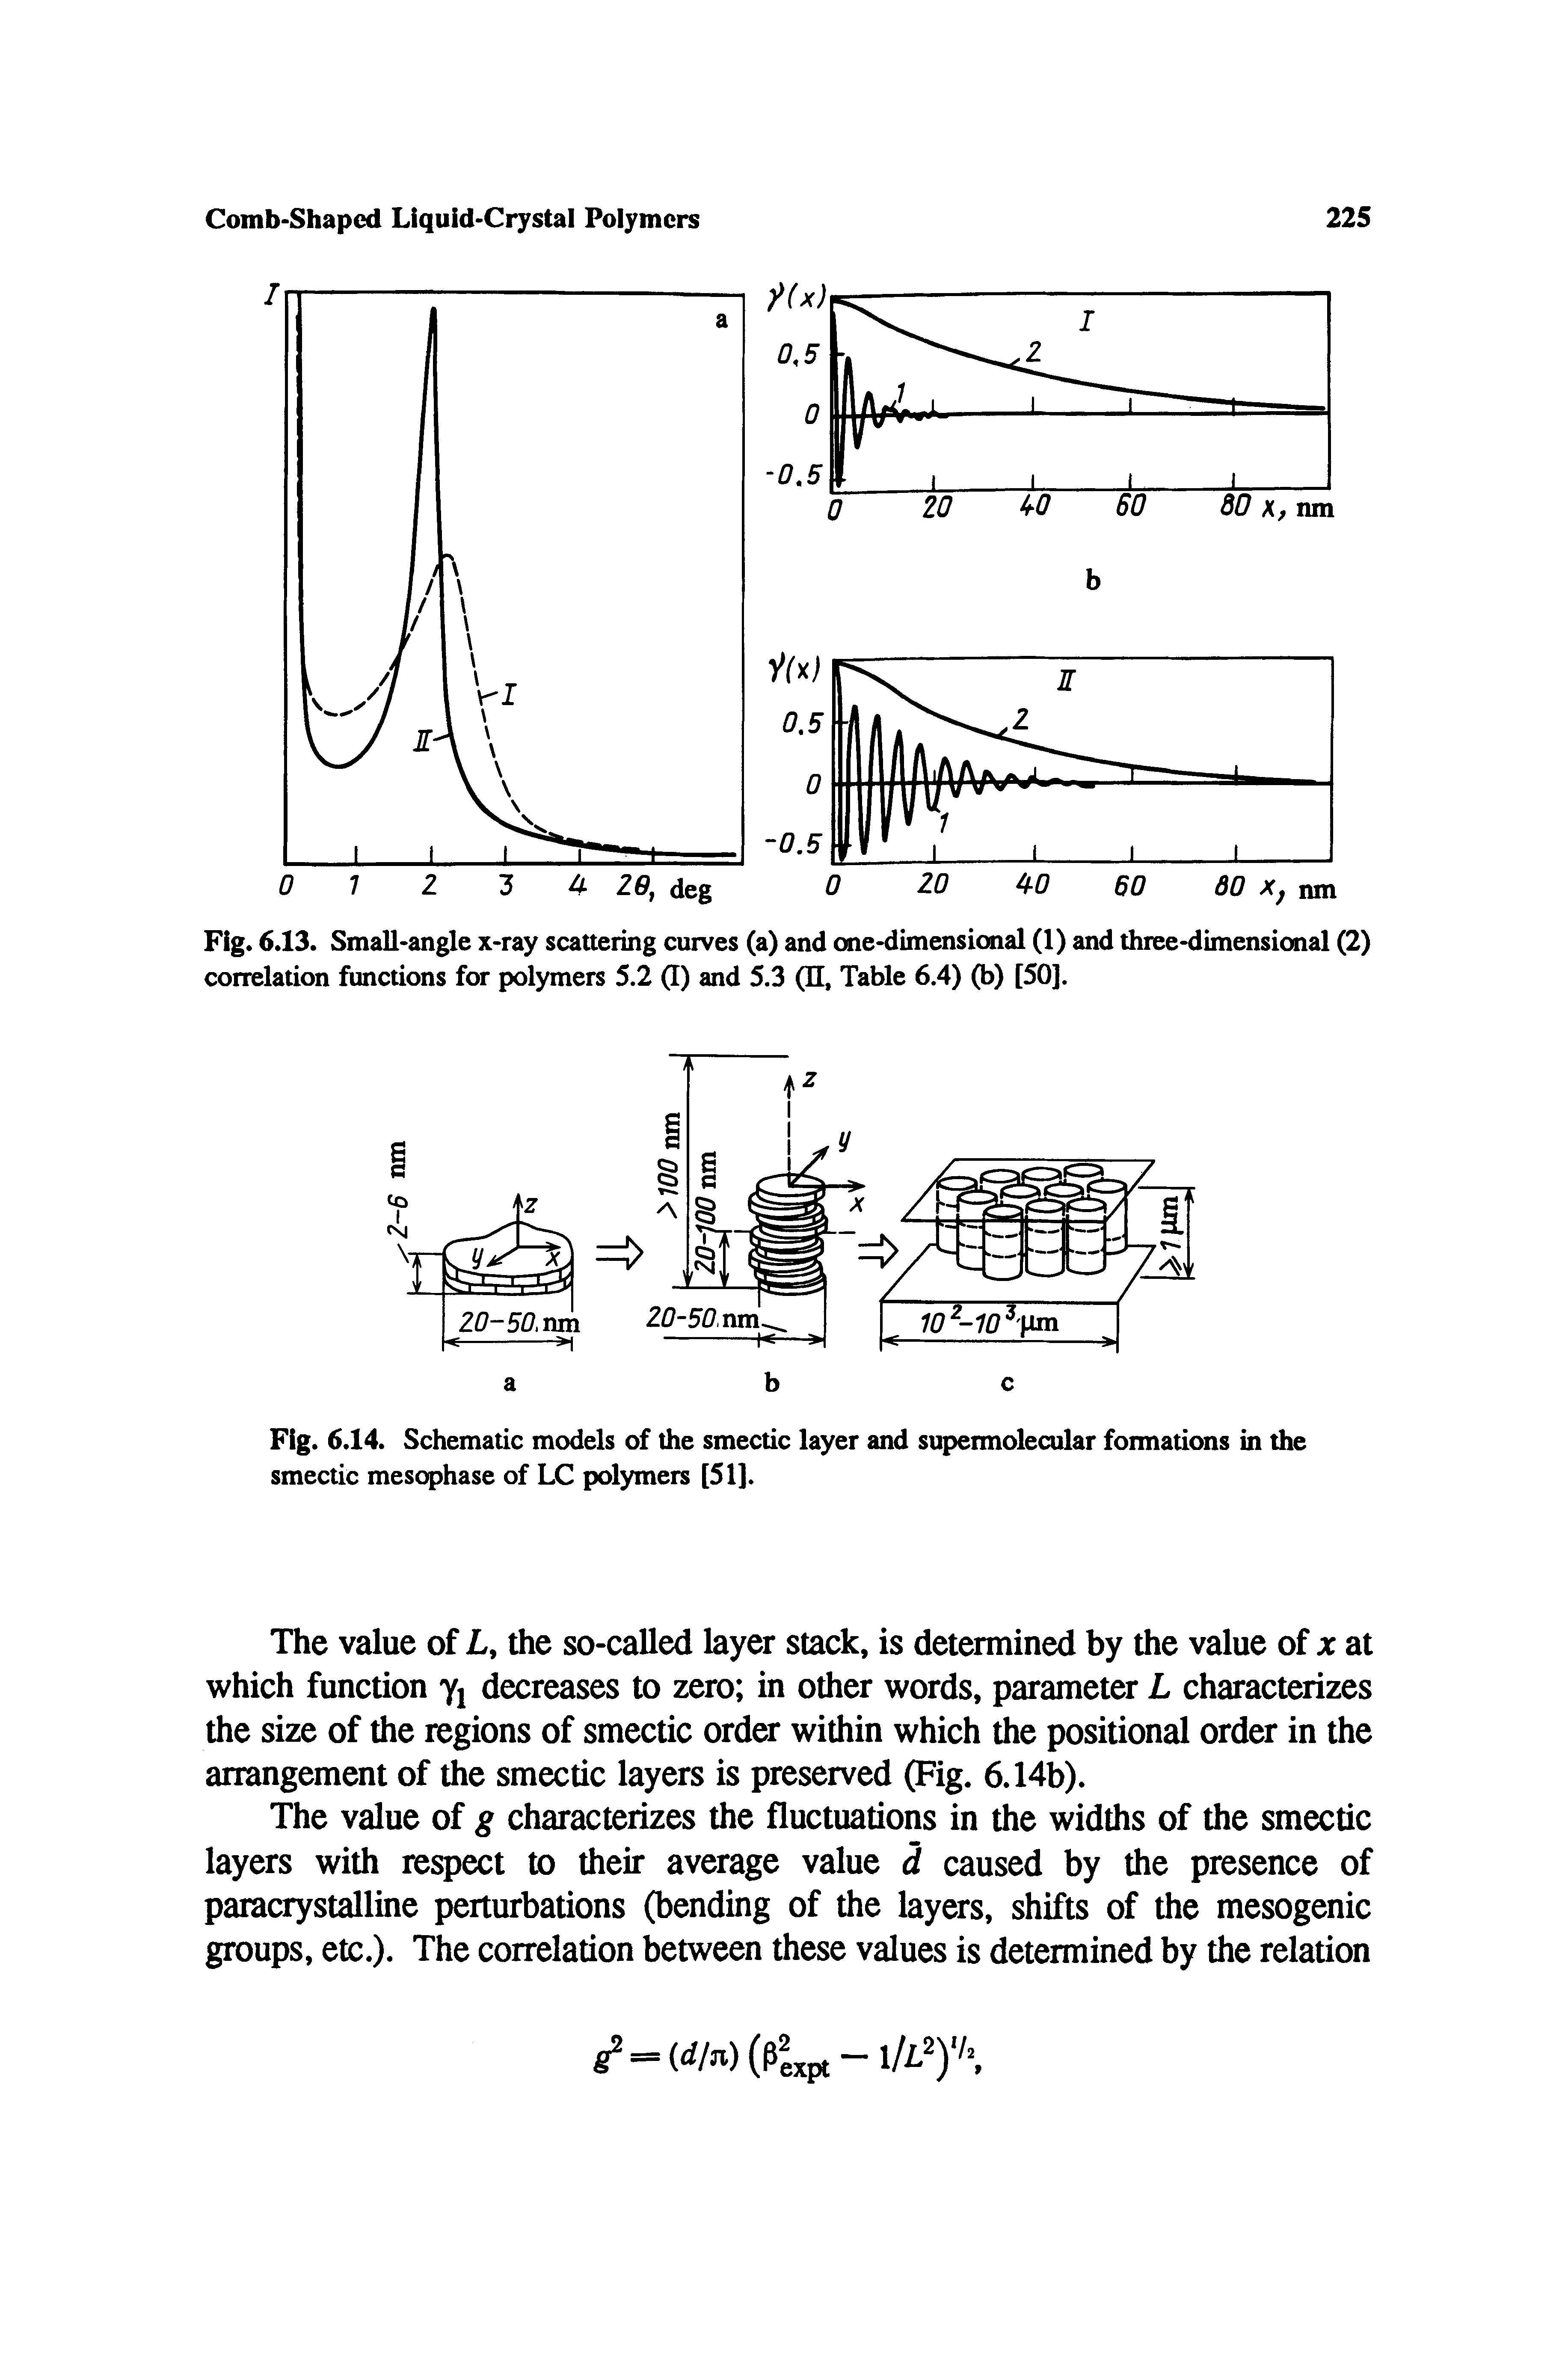 Fig. 6.13. Small-angle x-ray scattering curves (a) and one-dimensional (1) and three-dimensional (2) correlation functions for polymers 5.2 (I) and 5.3 (II. Table 6.4) (b) [50].